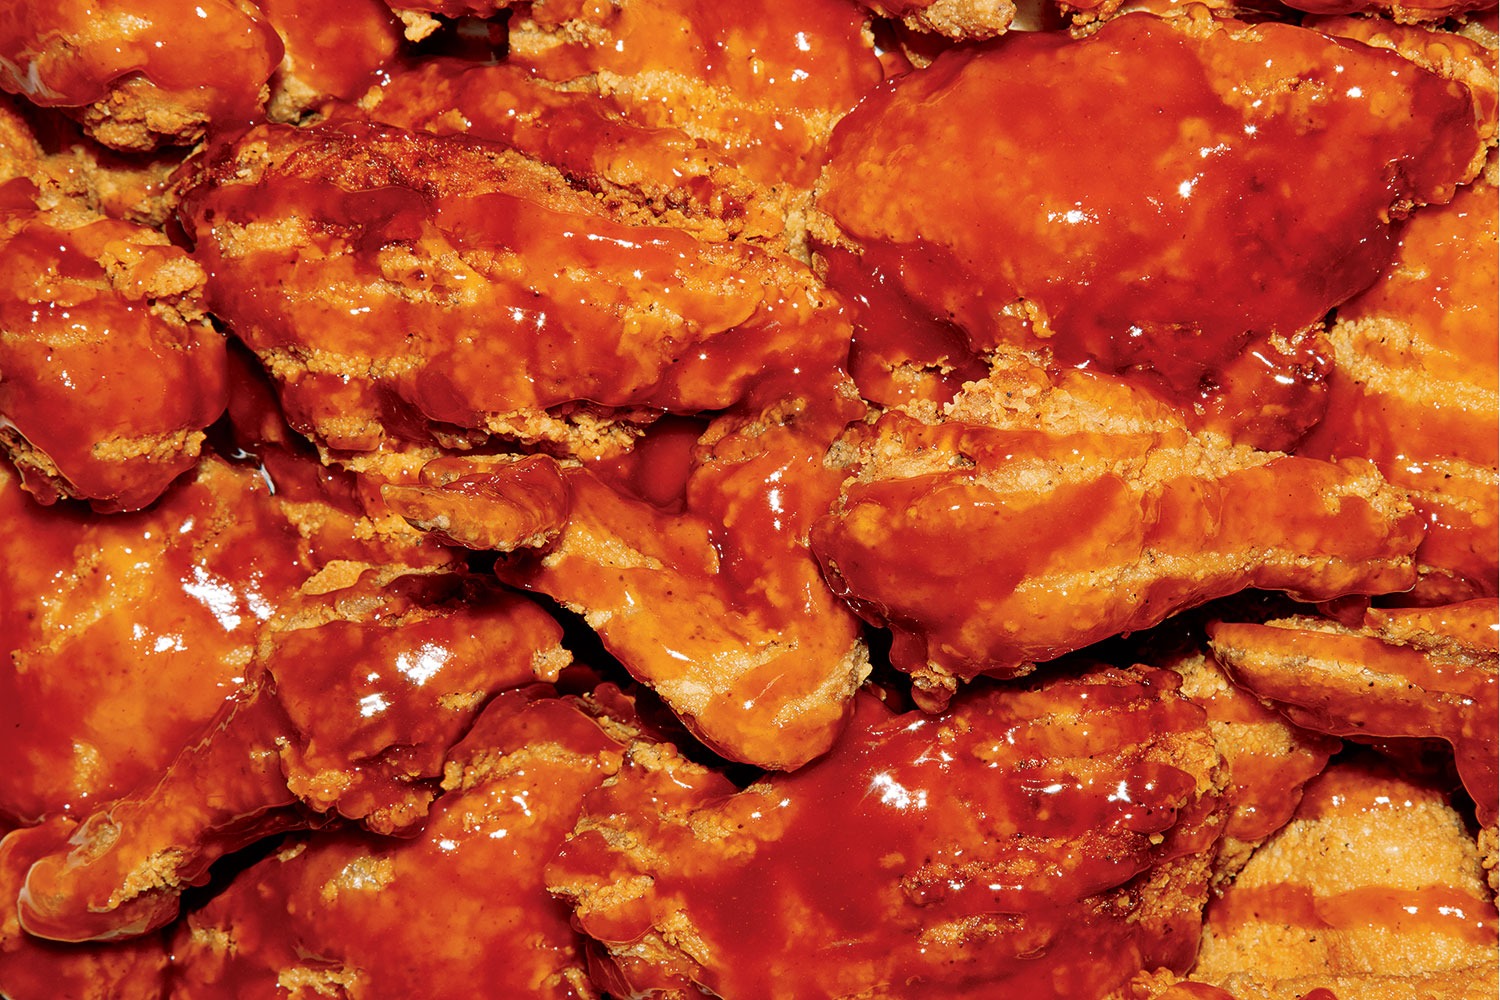 https://www.chicagomag.com/wp-content/uploads/2021/06/CIE-Wings-With-Mild-Sauce-Harolds-Wing-Shack.jpg